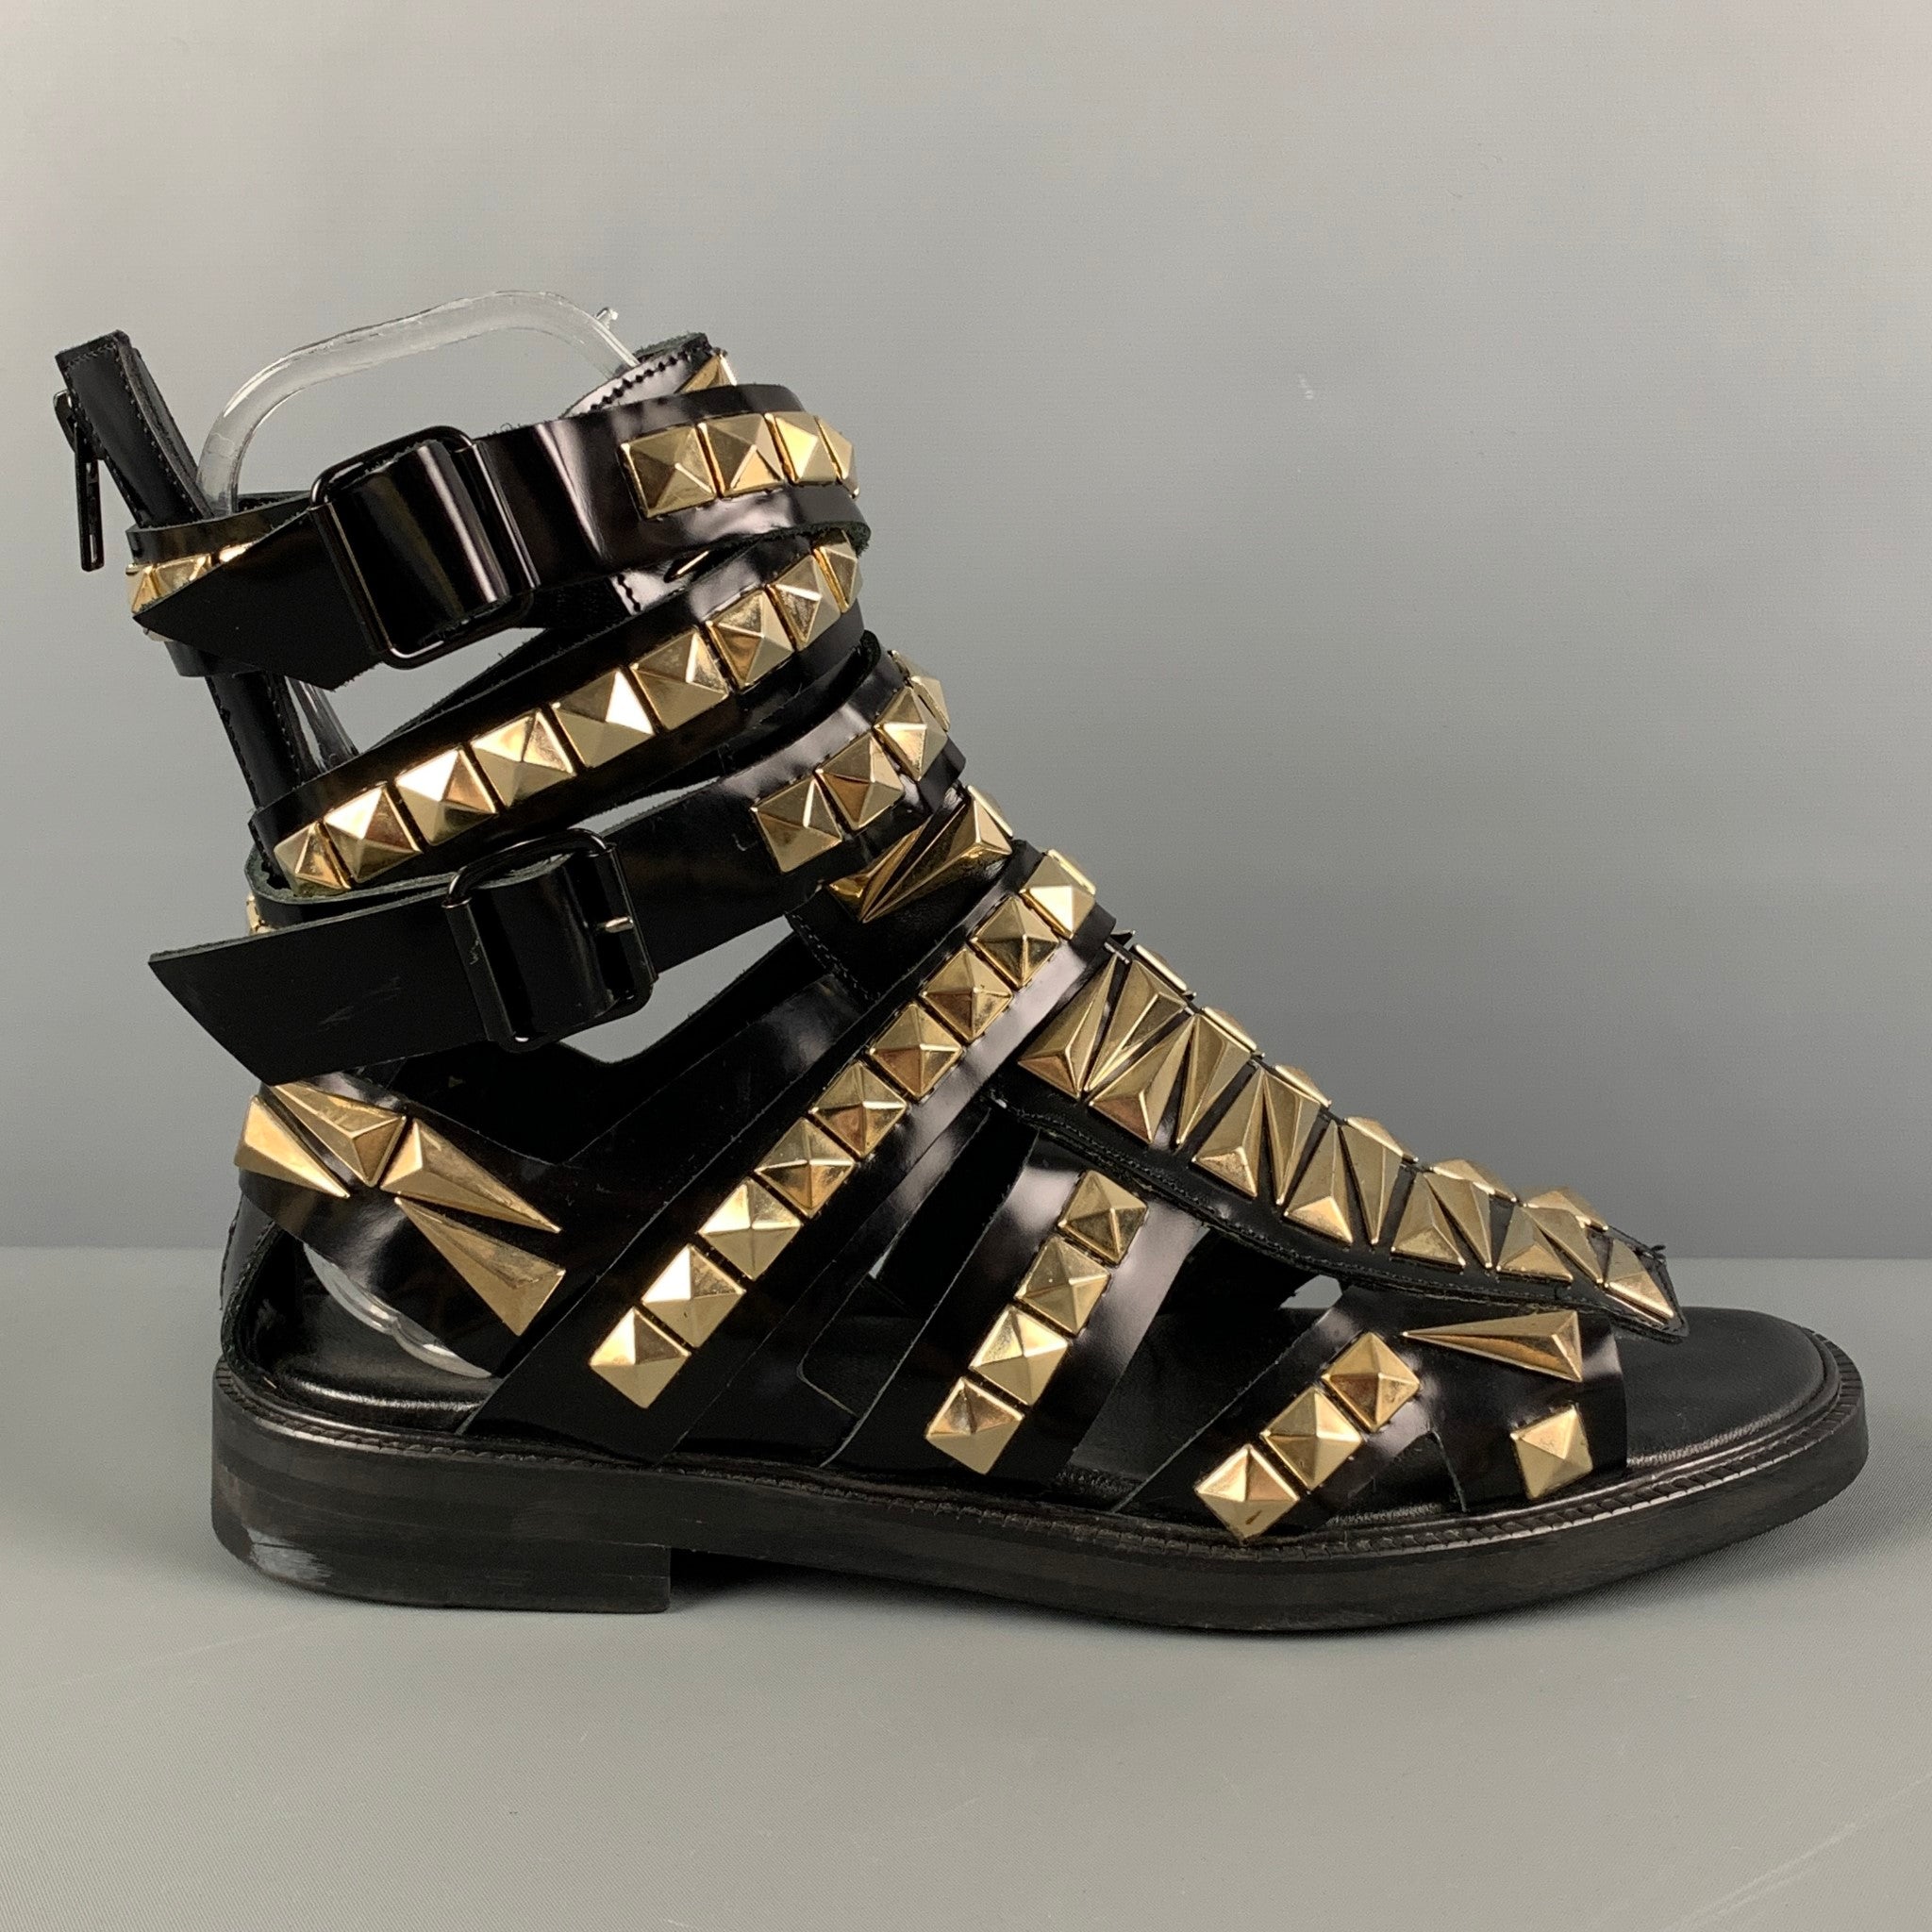 GIVENCHY SS 10 Size 11 Black Gold Studded Leather Gladiator Sandals